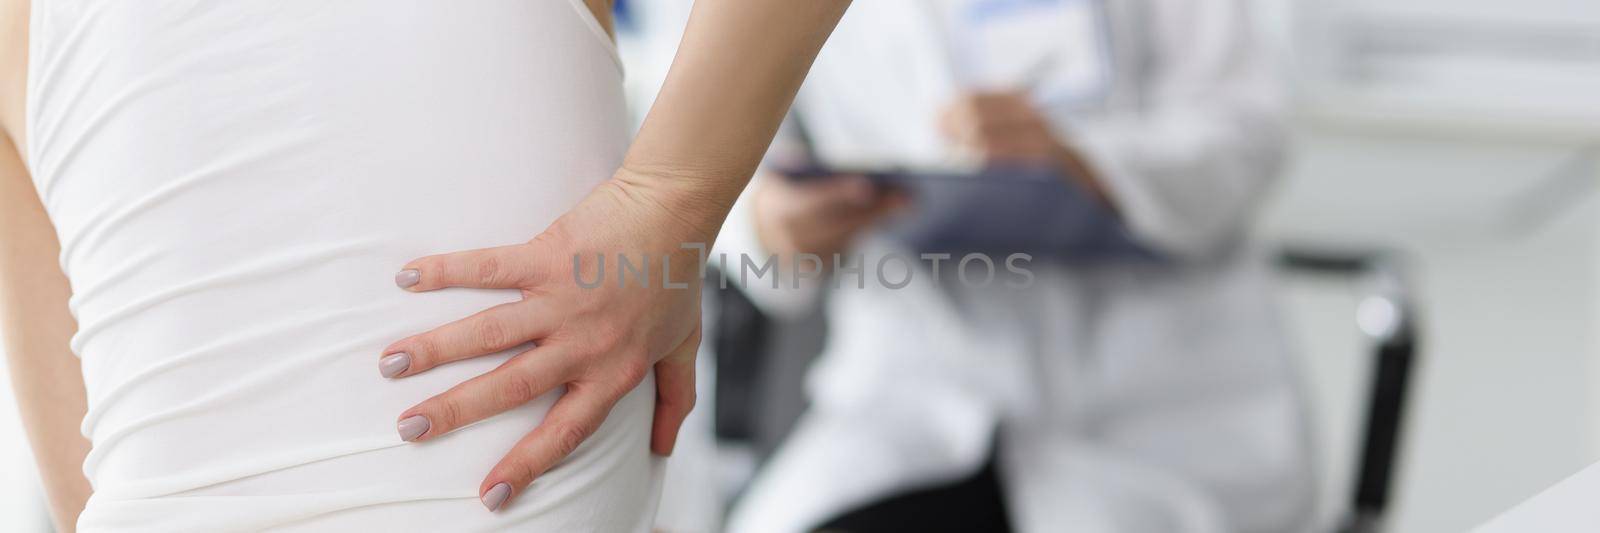 Close-up of female patient complain on back pain and touch side of body. Doctor listen to client and propose diagnostic. Healthcare, trauma surgeon concept